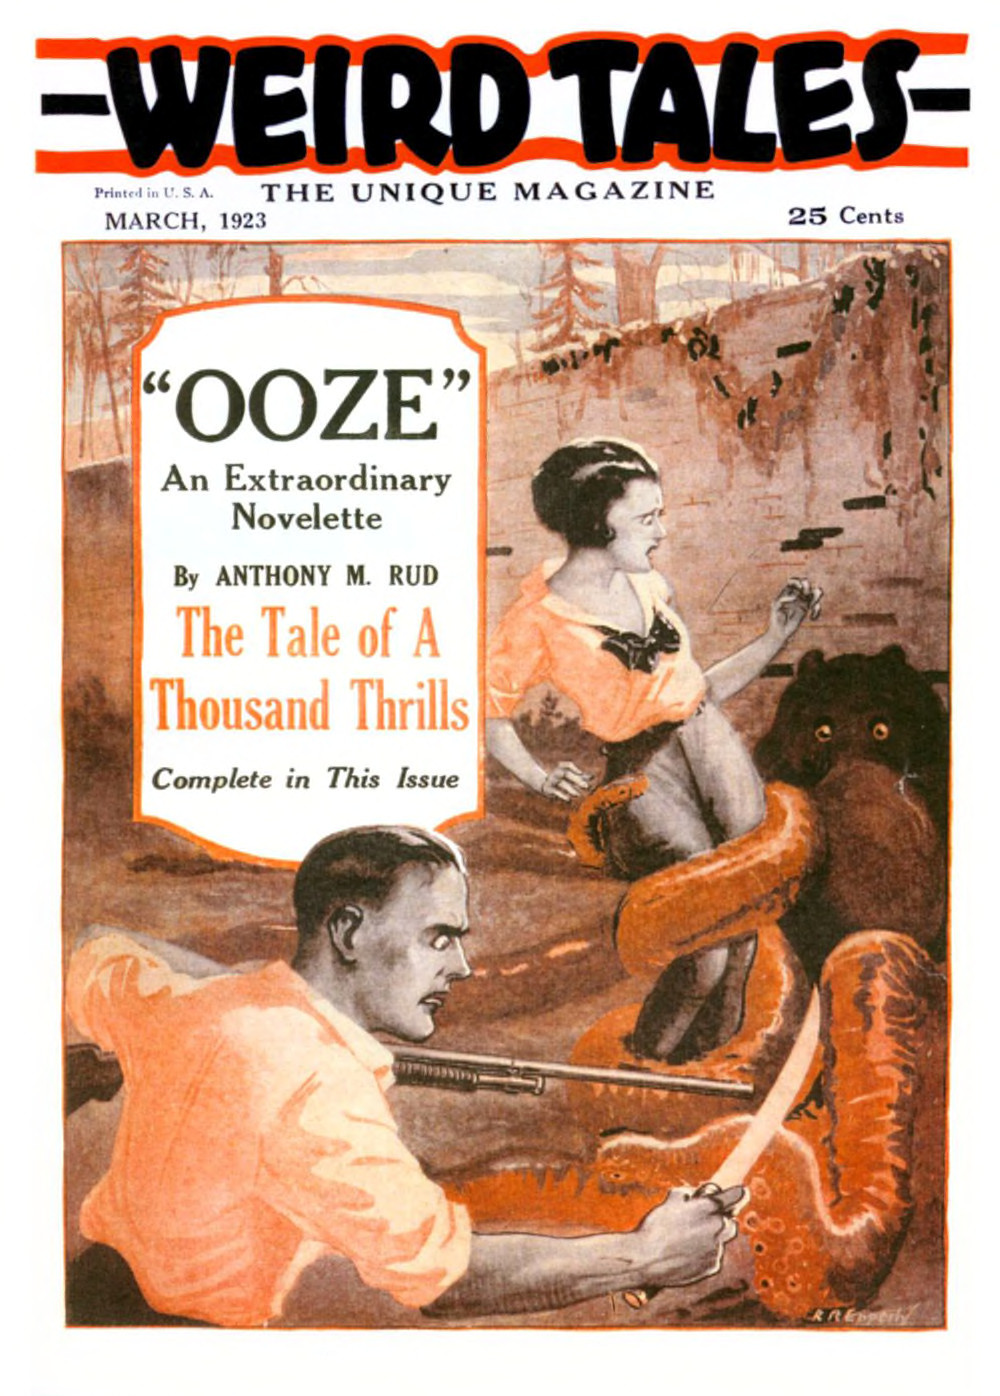 Weird Tales, Volume 1, Number 1, March 1923: The unique magazine